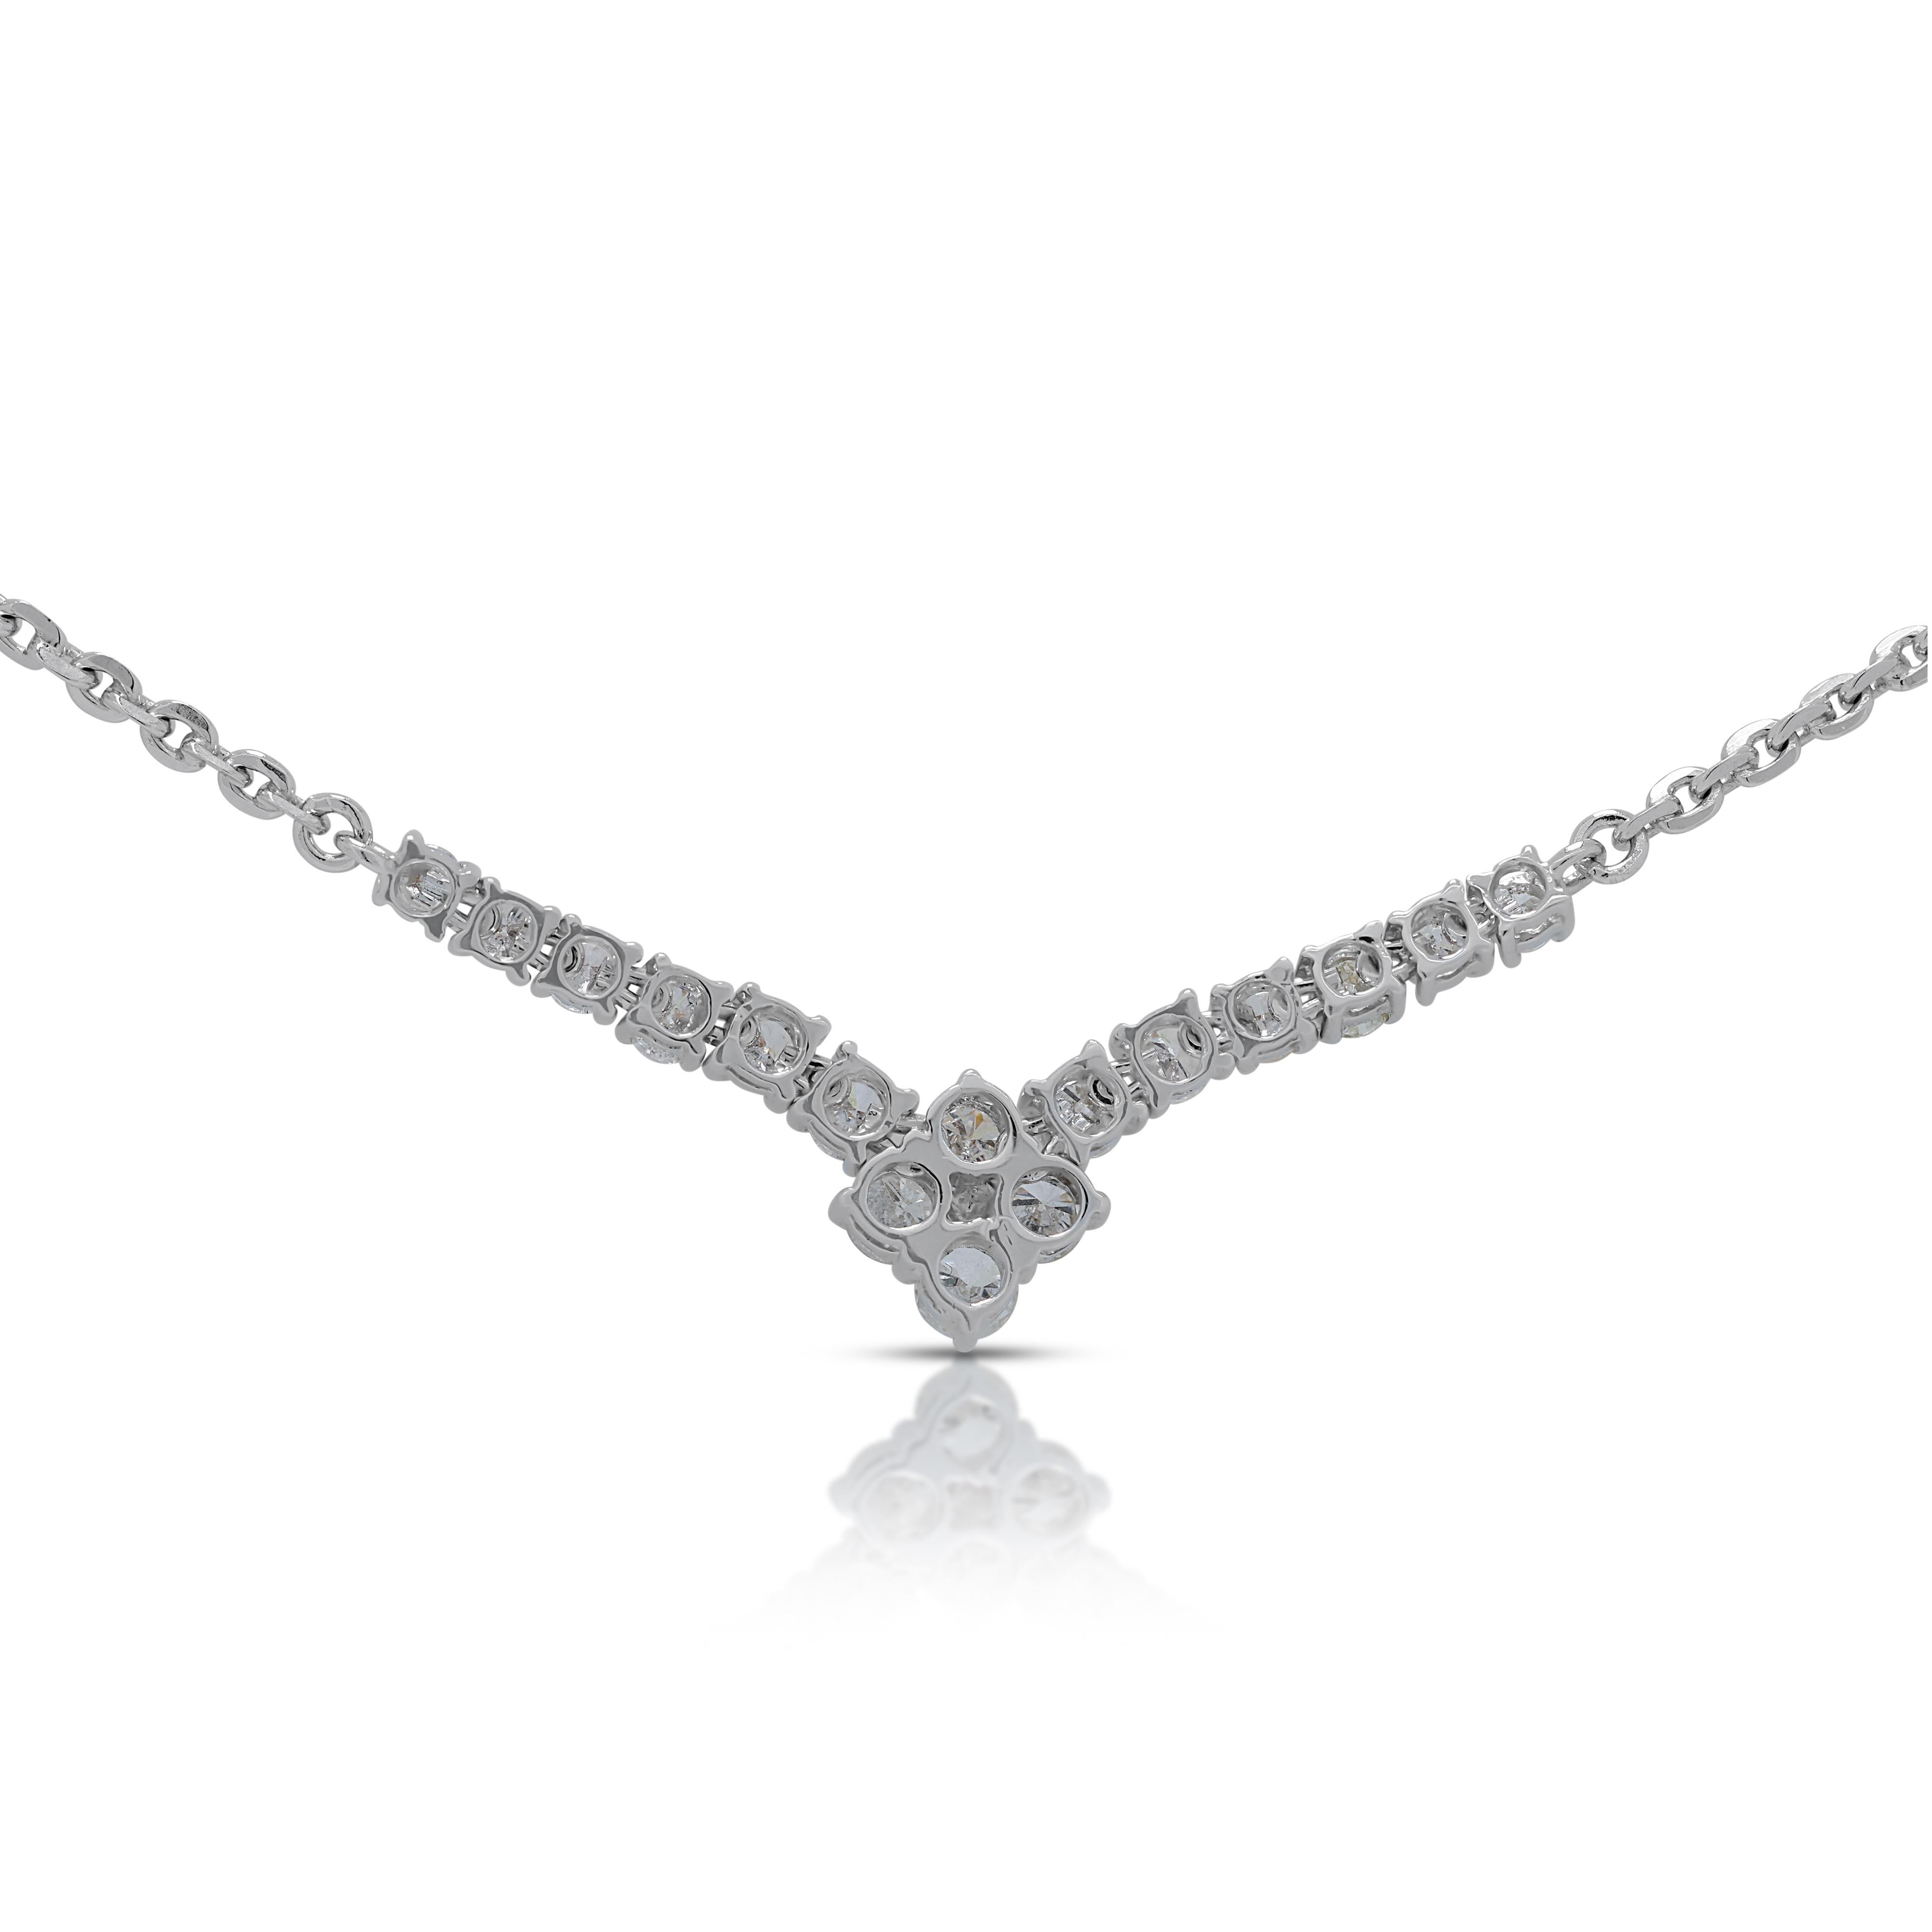 Exquisite 1.0ct Diamonds Necklace in 18K White Gold  For Sale 2